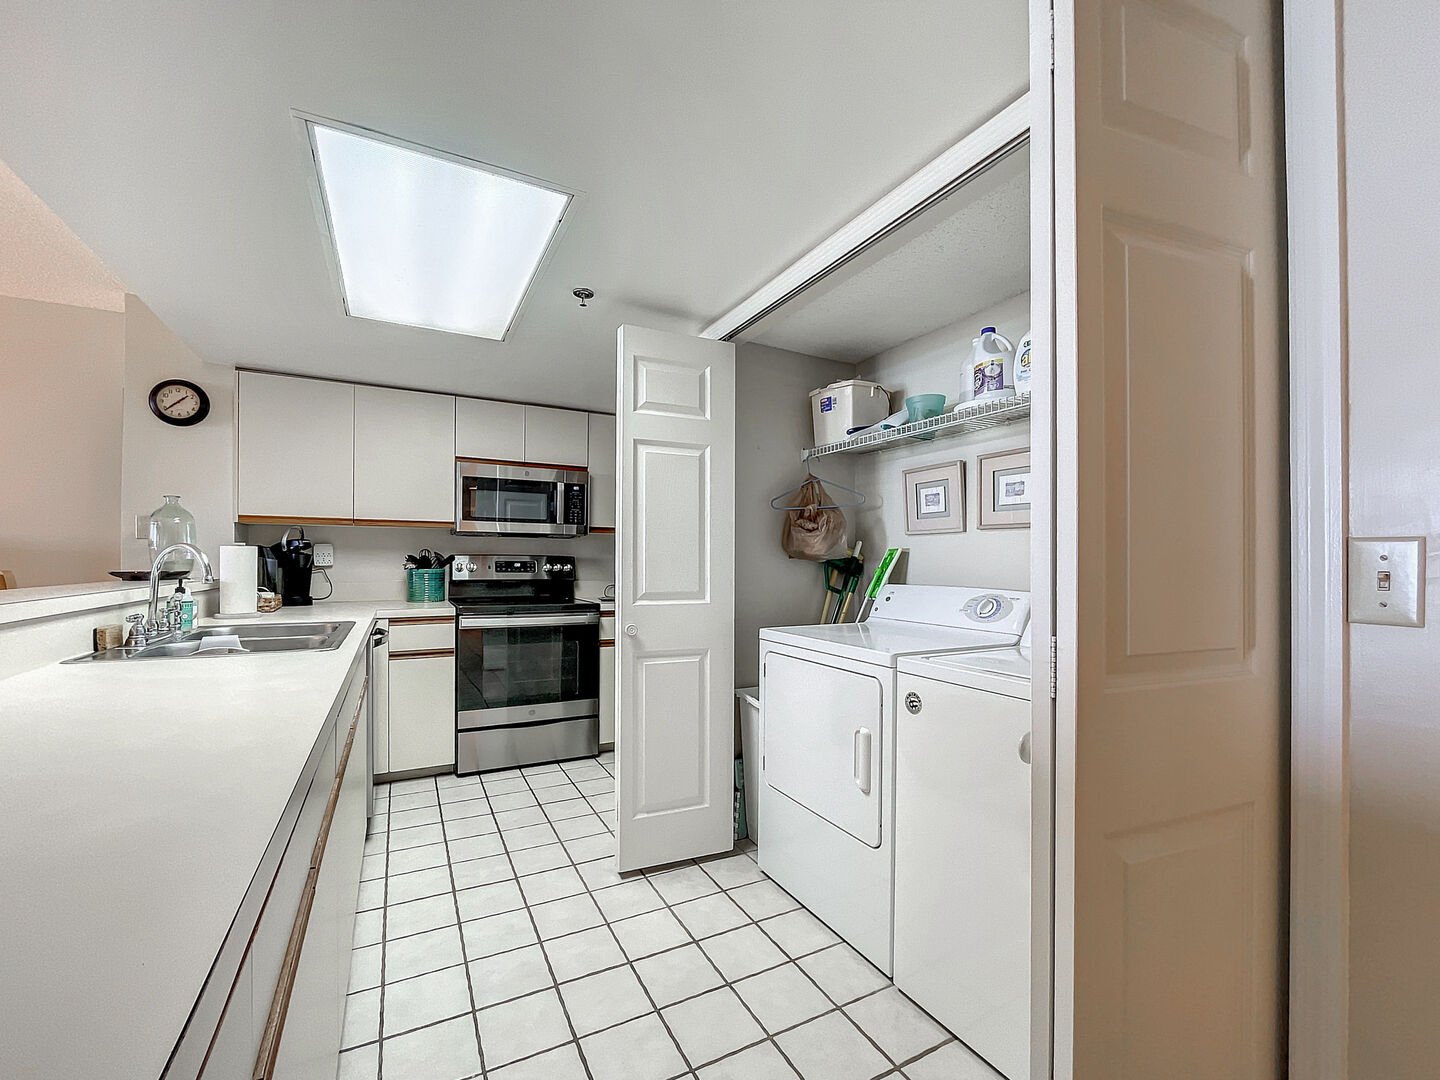 With views of the ocean, prepare your favorite island delight in the fully equipped kitchen. Also full sized washer and dryer.